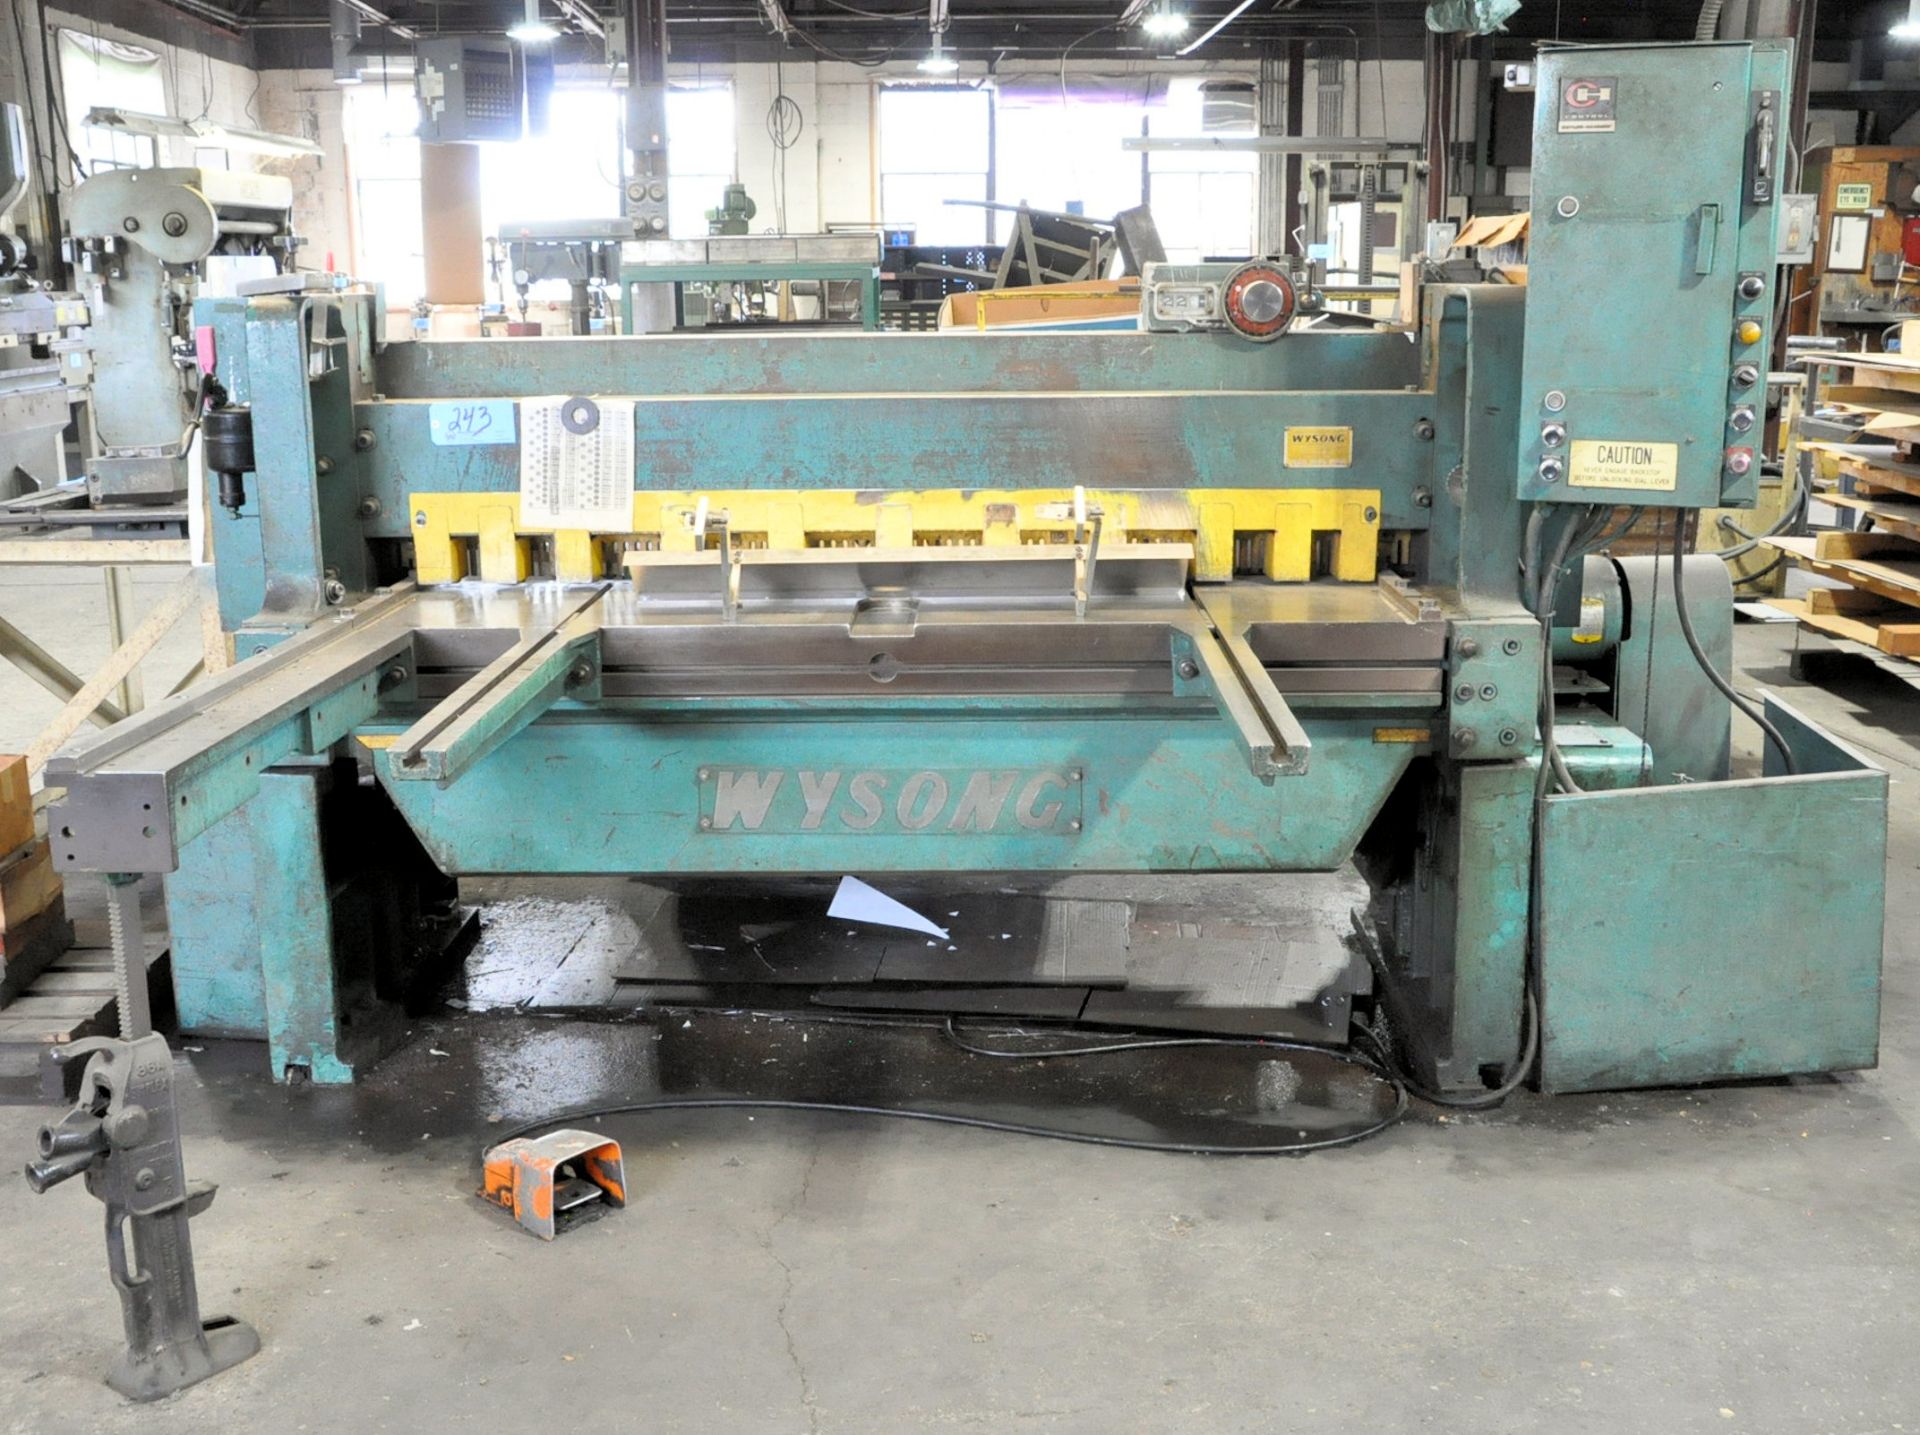 THIS IS A Non-Biddable Lot - Auction Featured Machines - Image 2 of 7